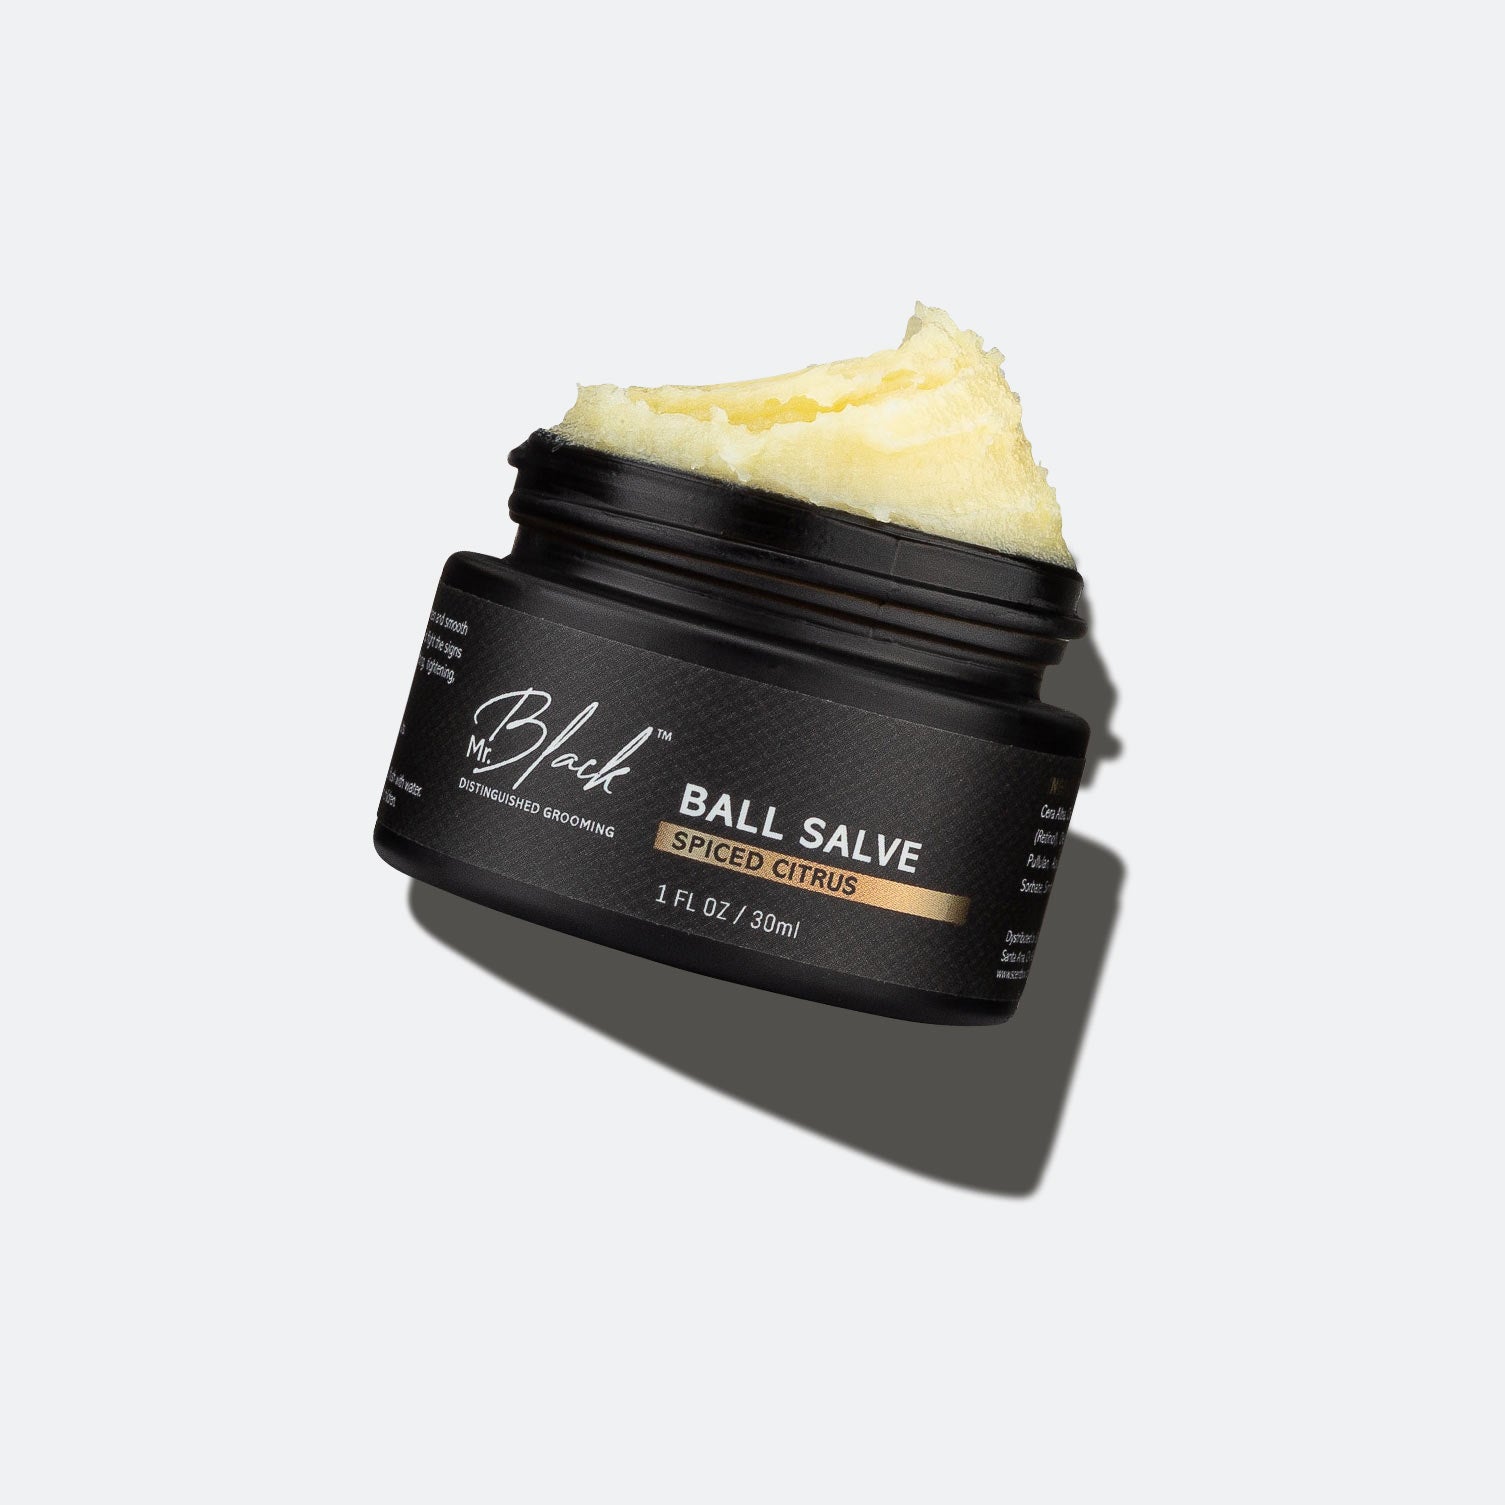 Image of Ball Salve Anti-Aging - Spiced Citrus